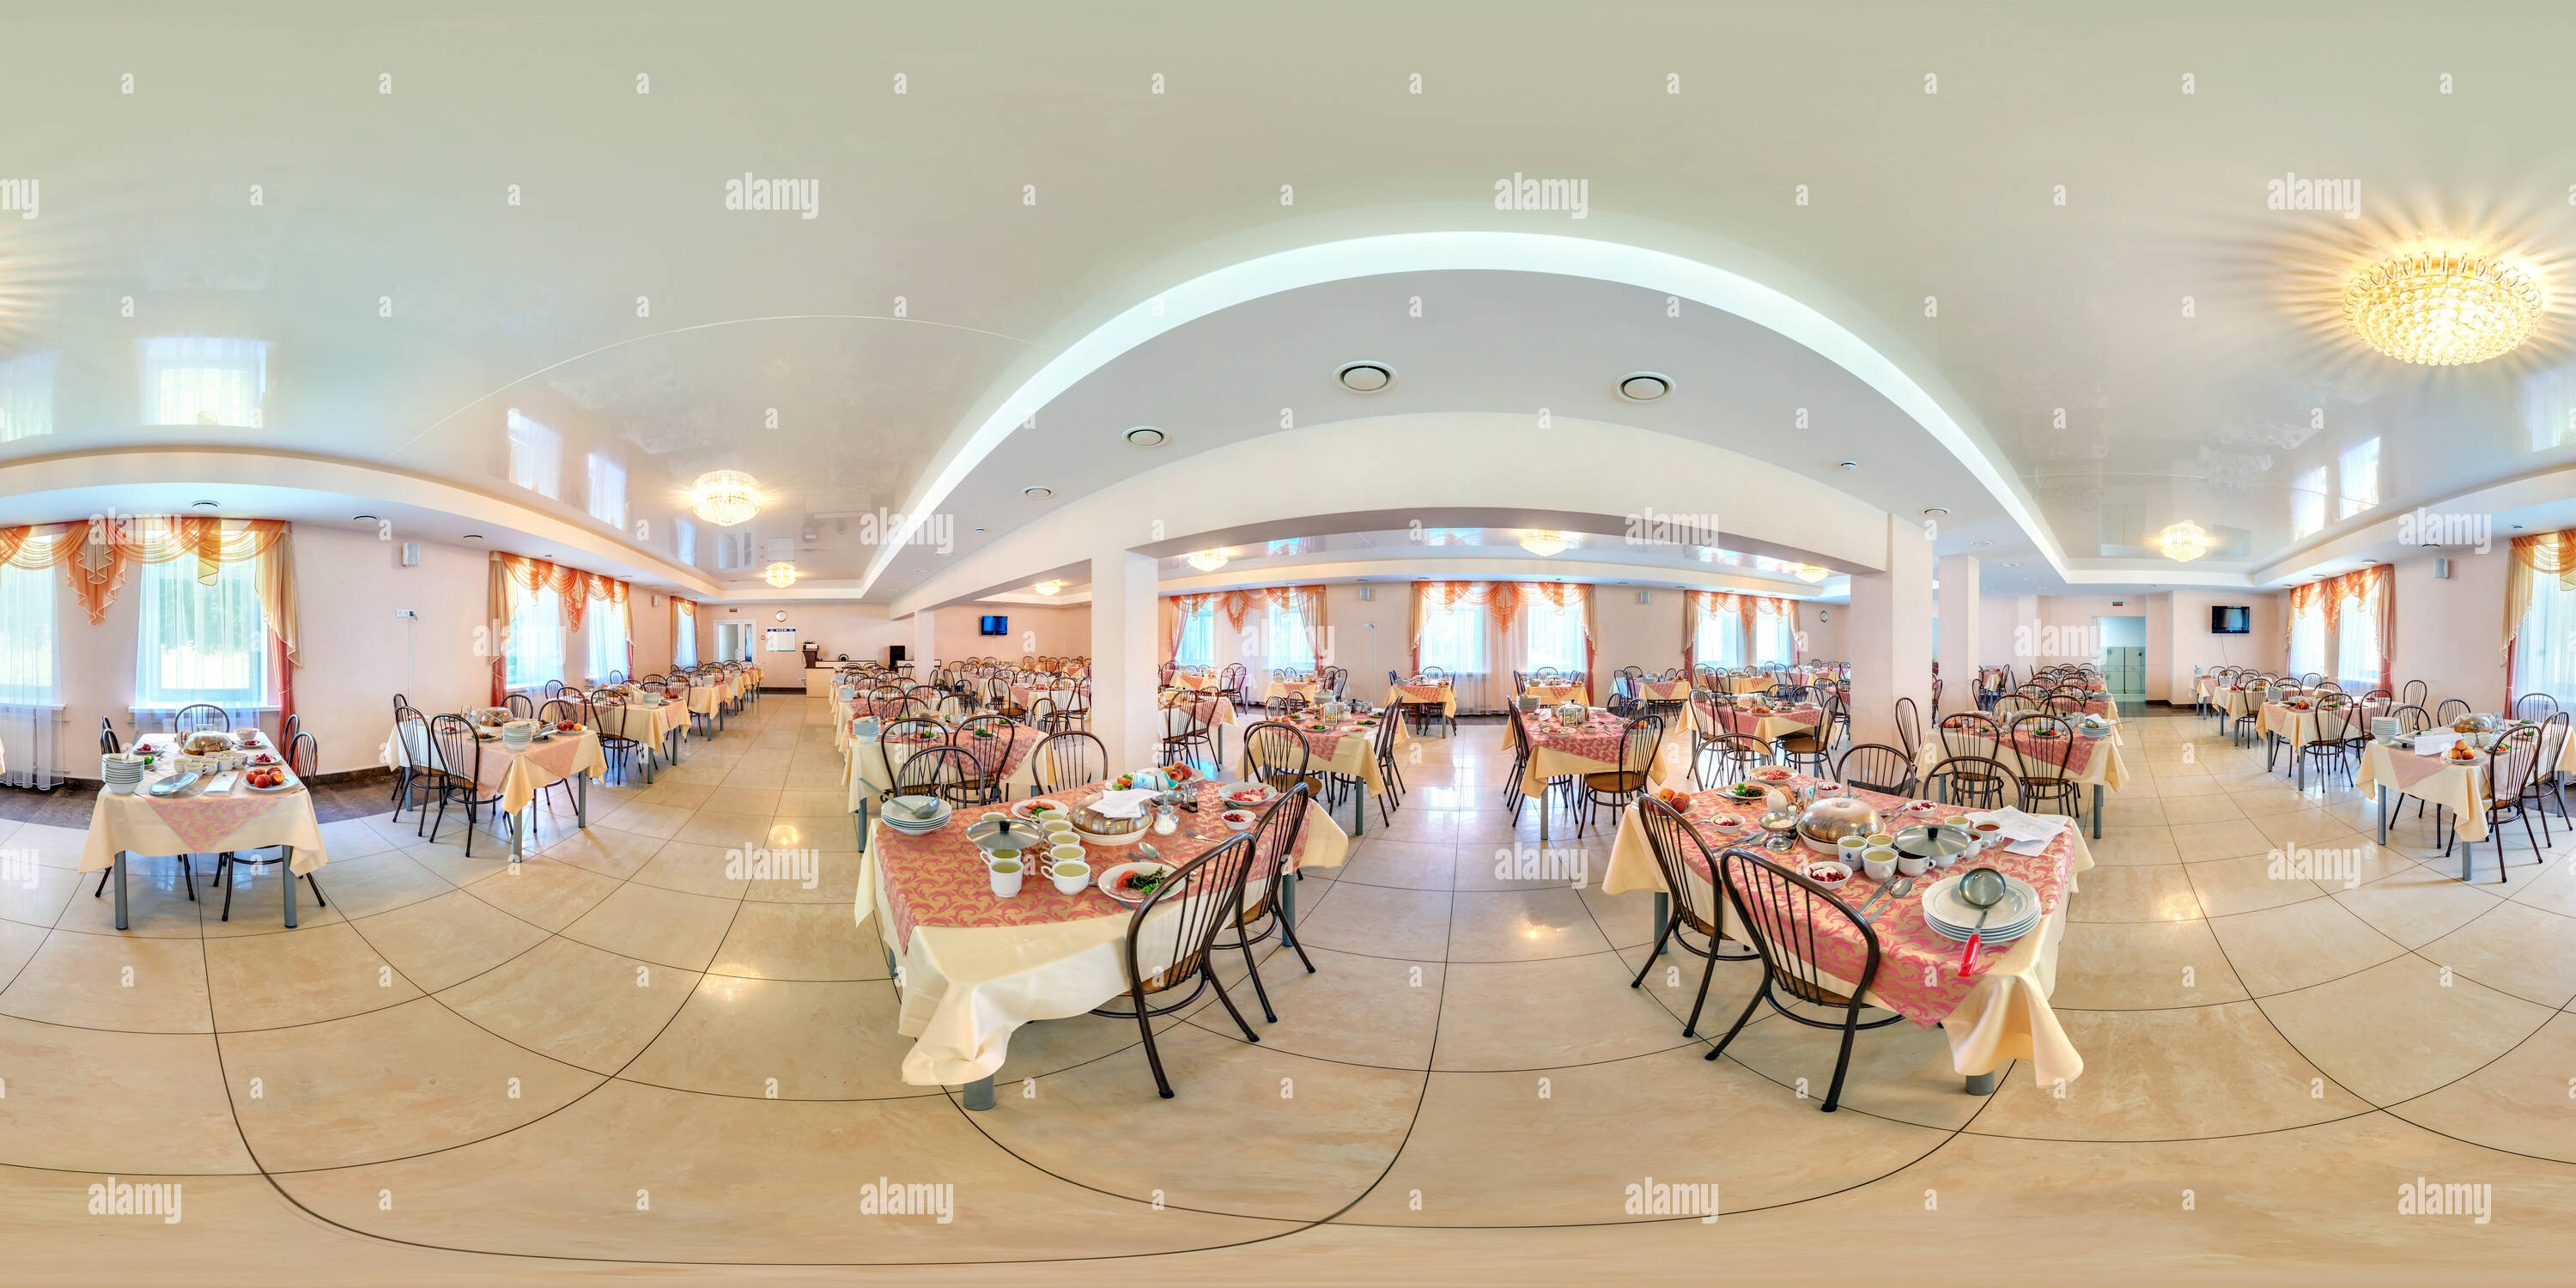 360 degree panoramic view of MINSK, BELARUS - JULY 19, 2013: Full spherical 360 by 180 degrees seamless panorama in equirectangular equidistant projection, panorama in interior fa